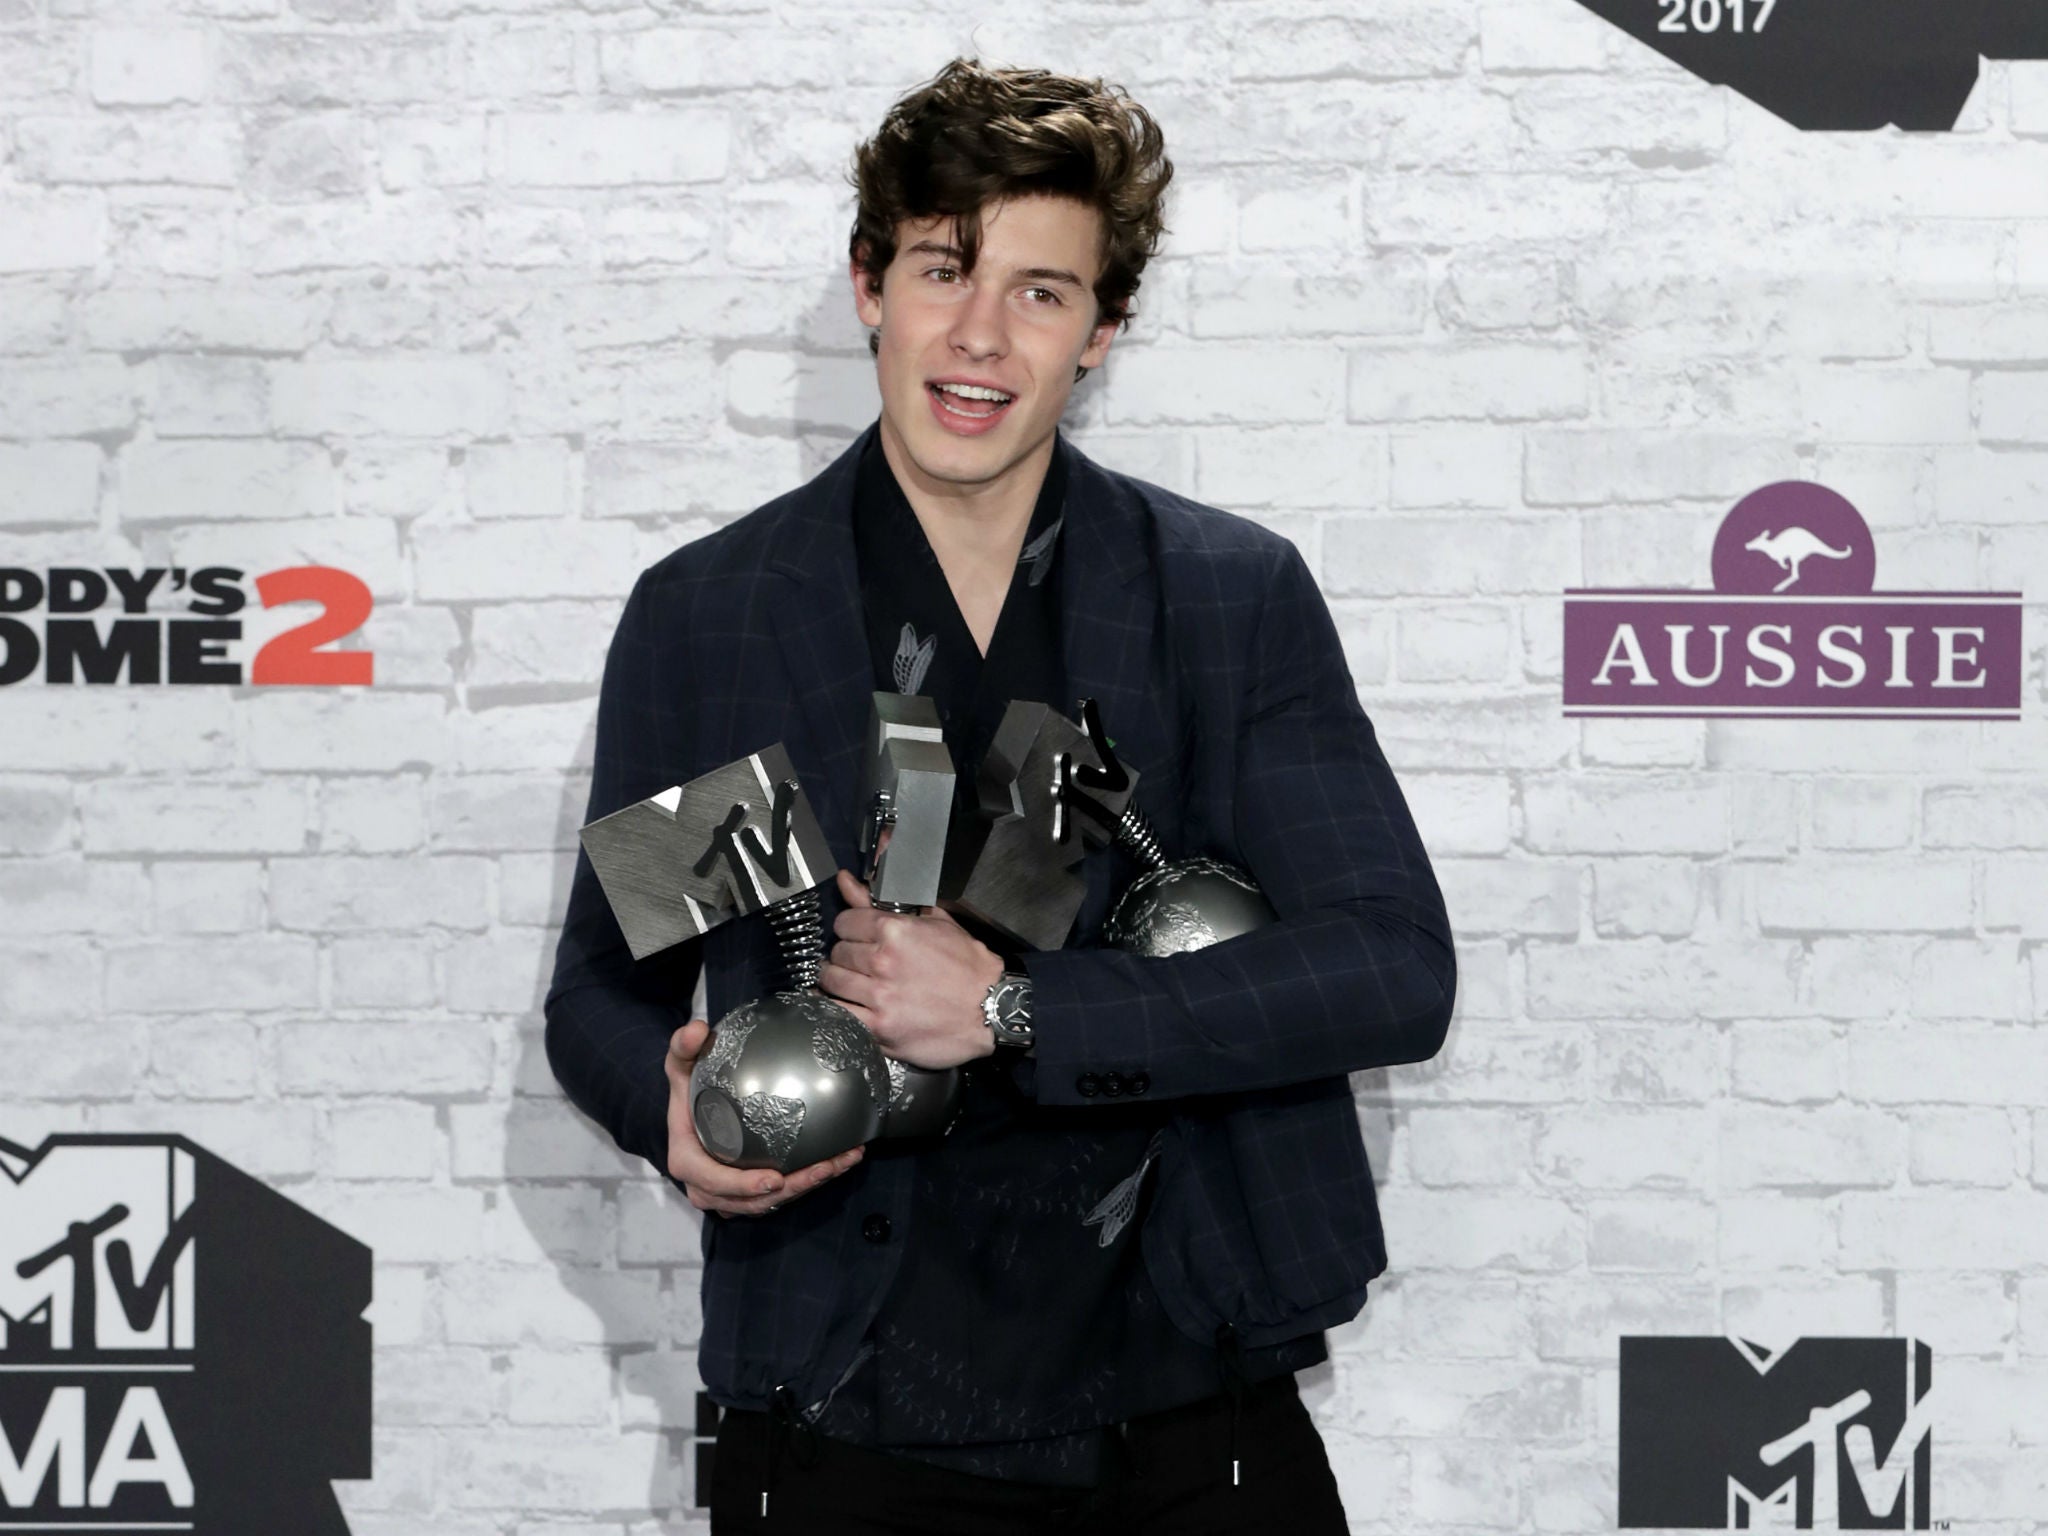 Shawn Mendes poses in the winner's room with awards for Biggest Fans, Best Artist and Best Song